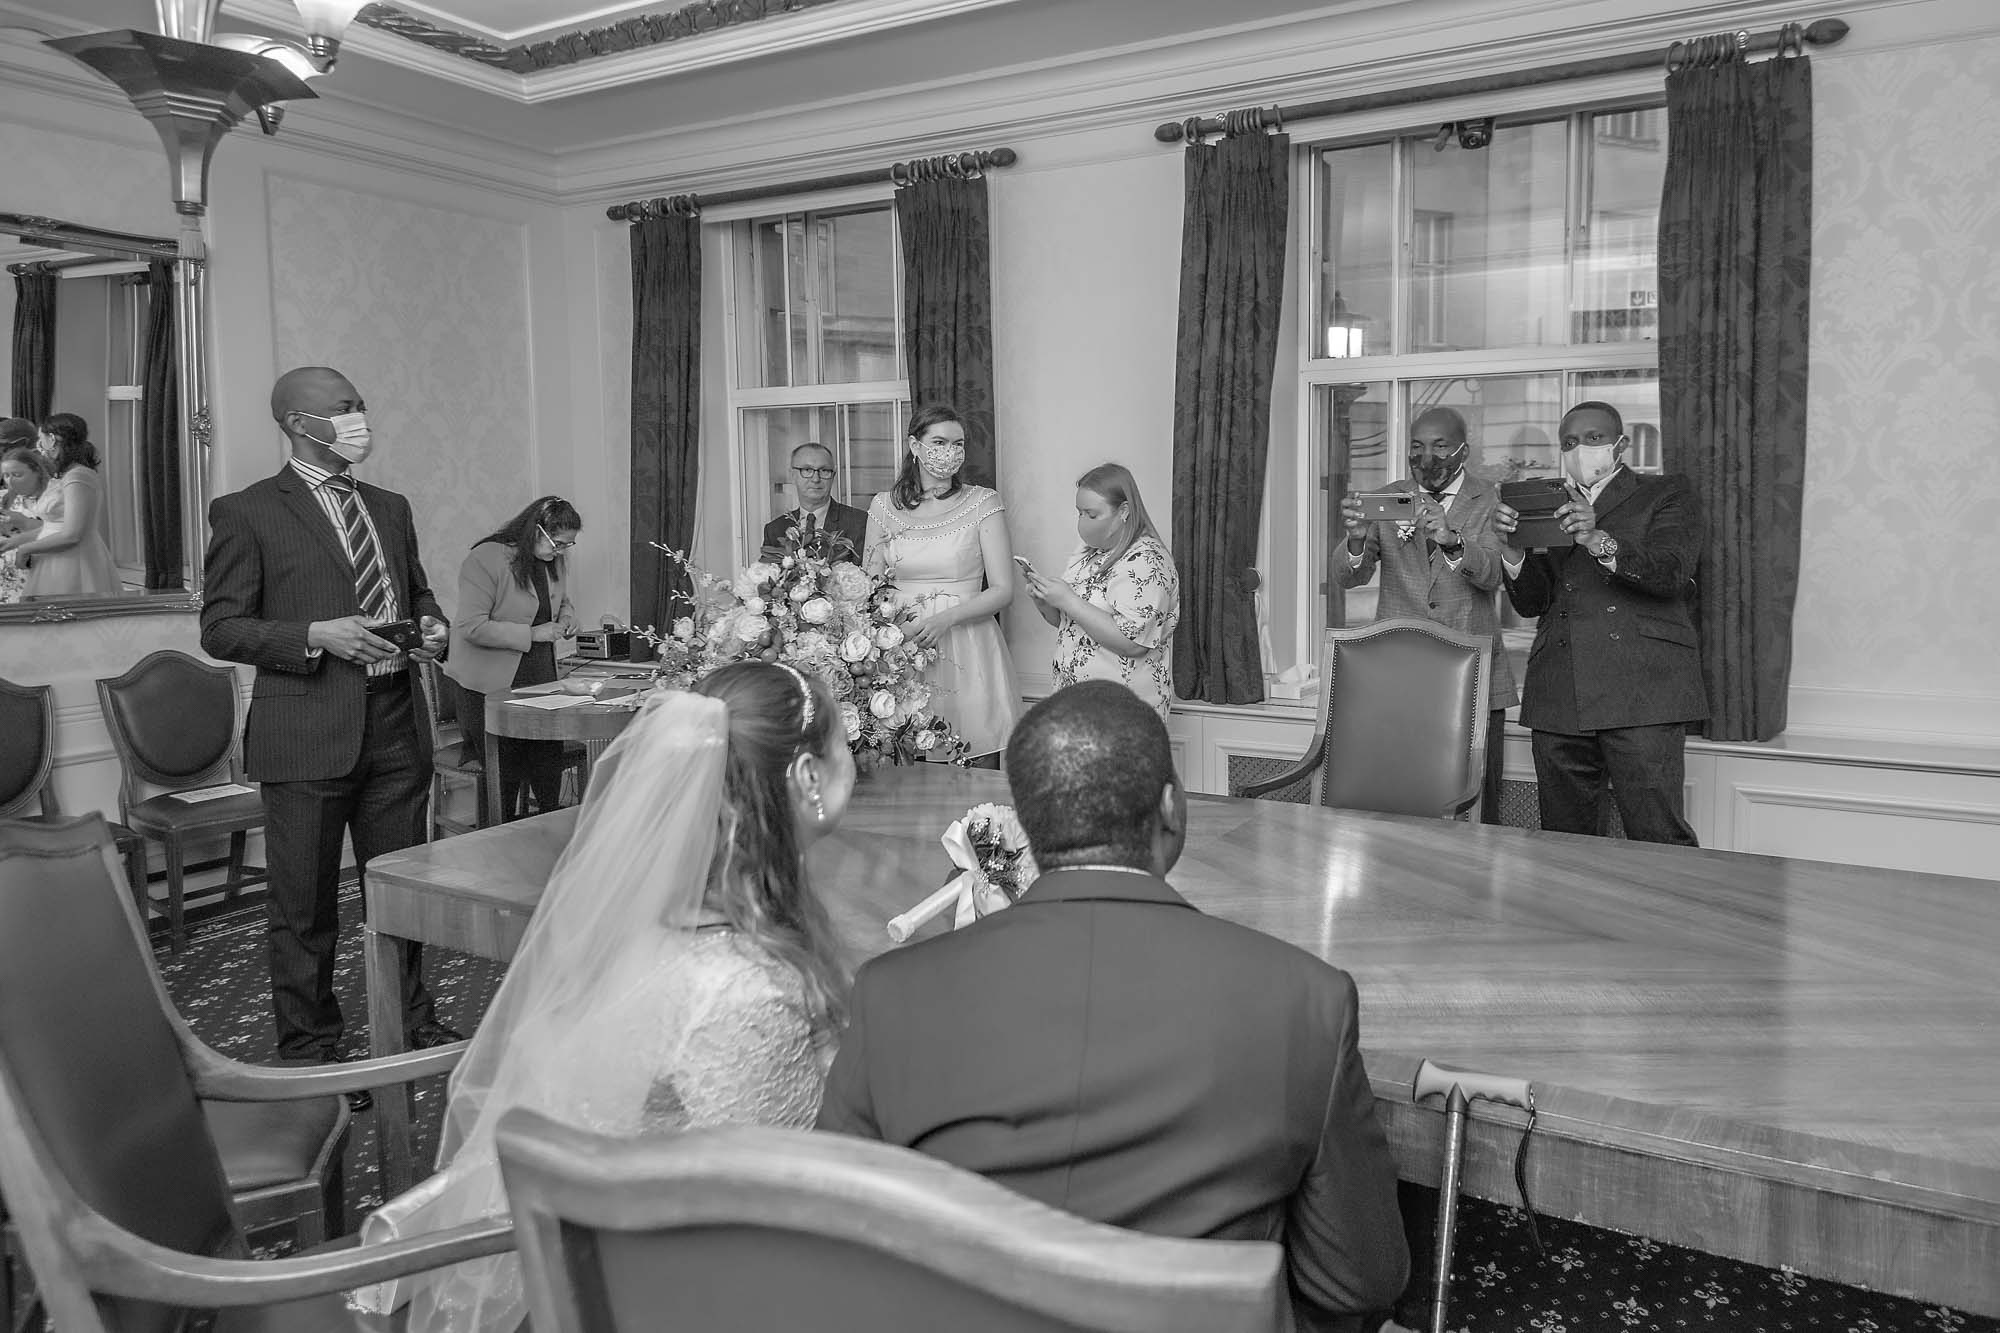 Guests take photographs of the seated couple at their register office wedding